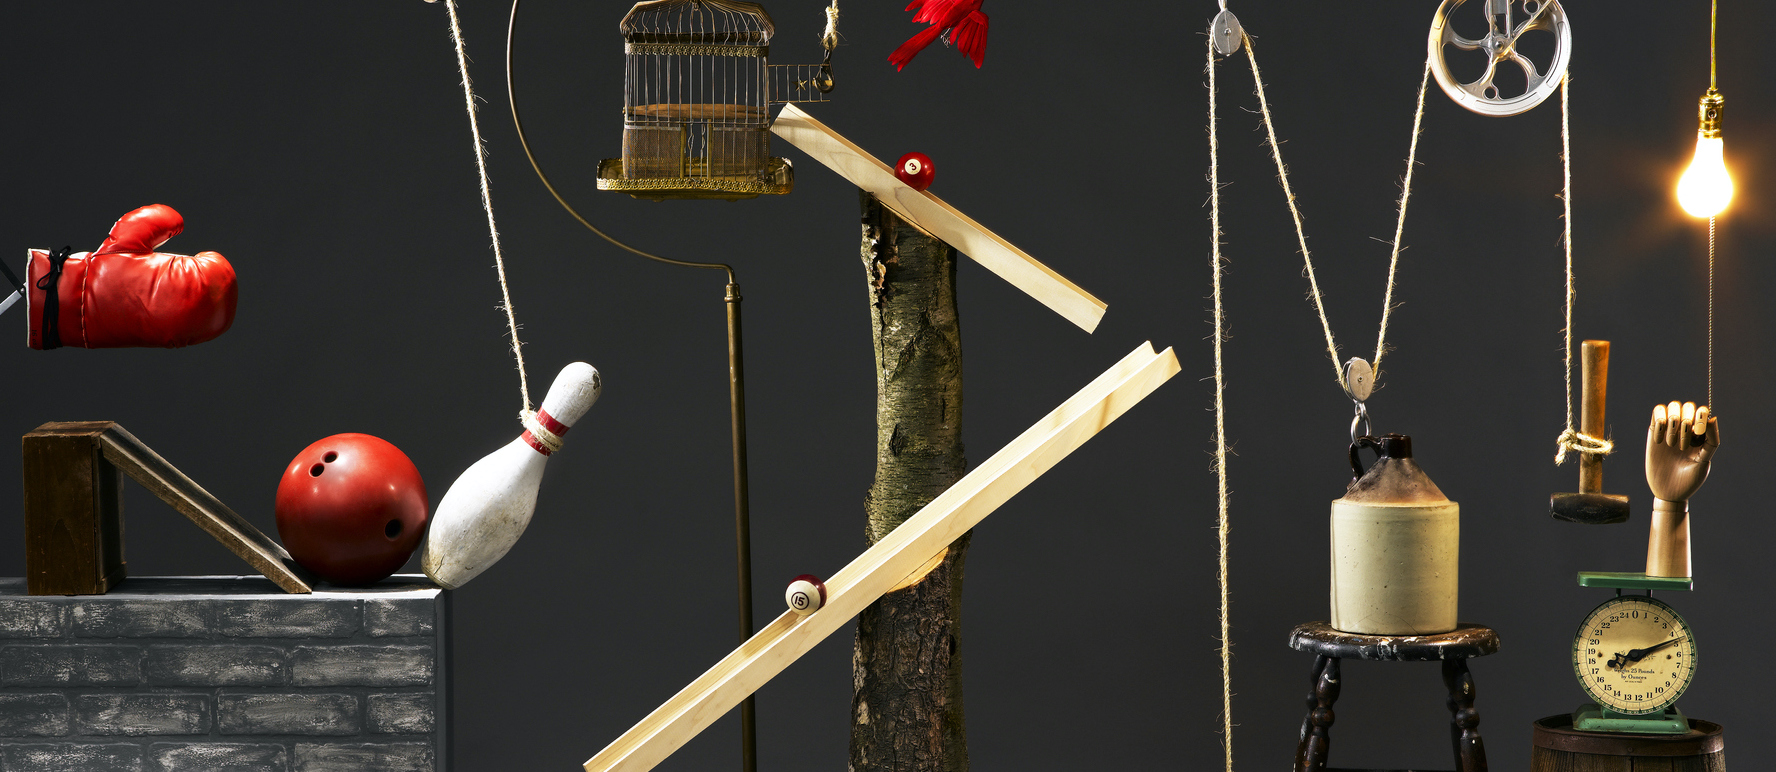 An image of a rube goldberg machine with a gray background